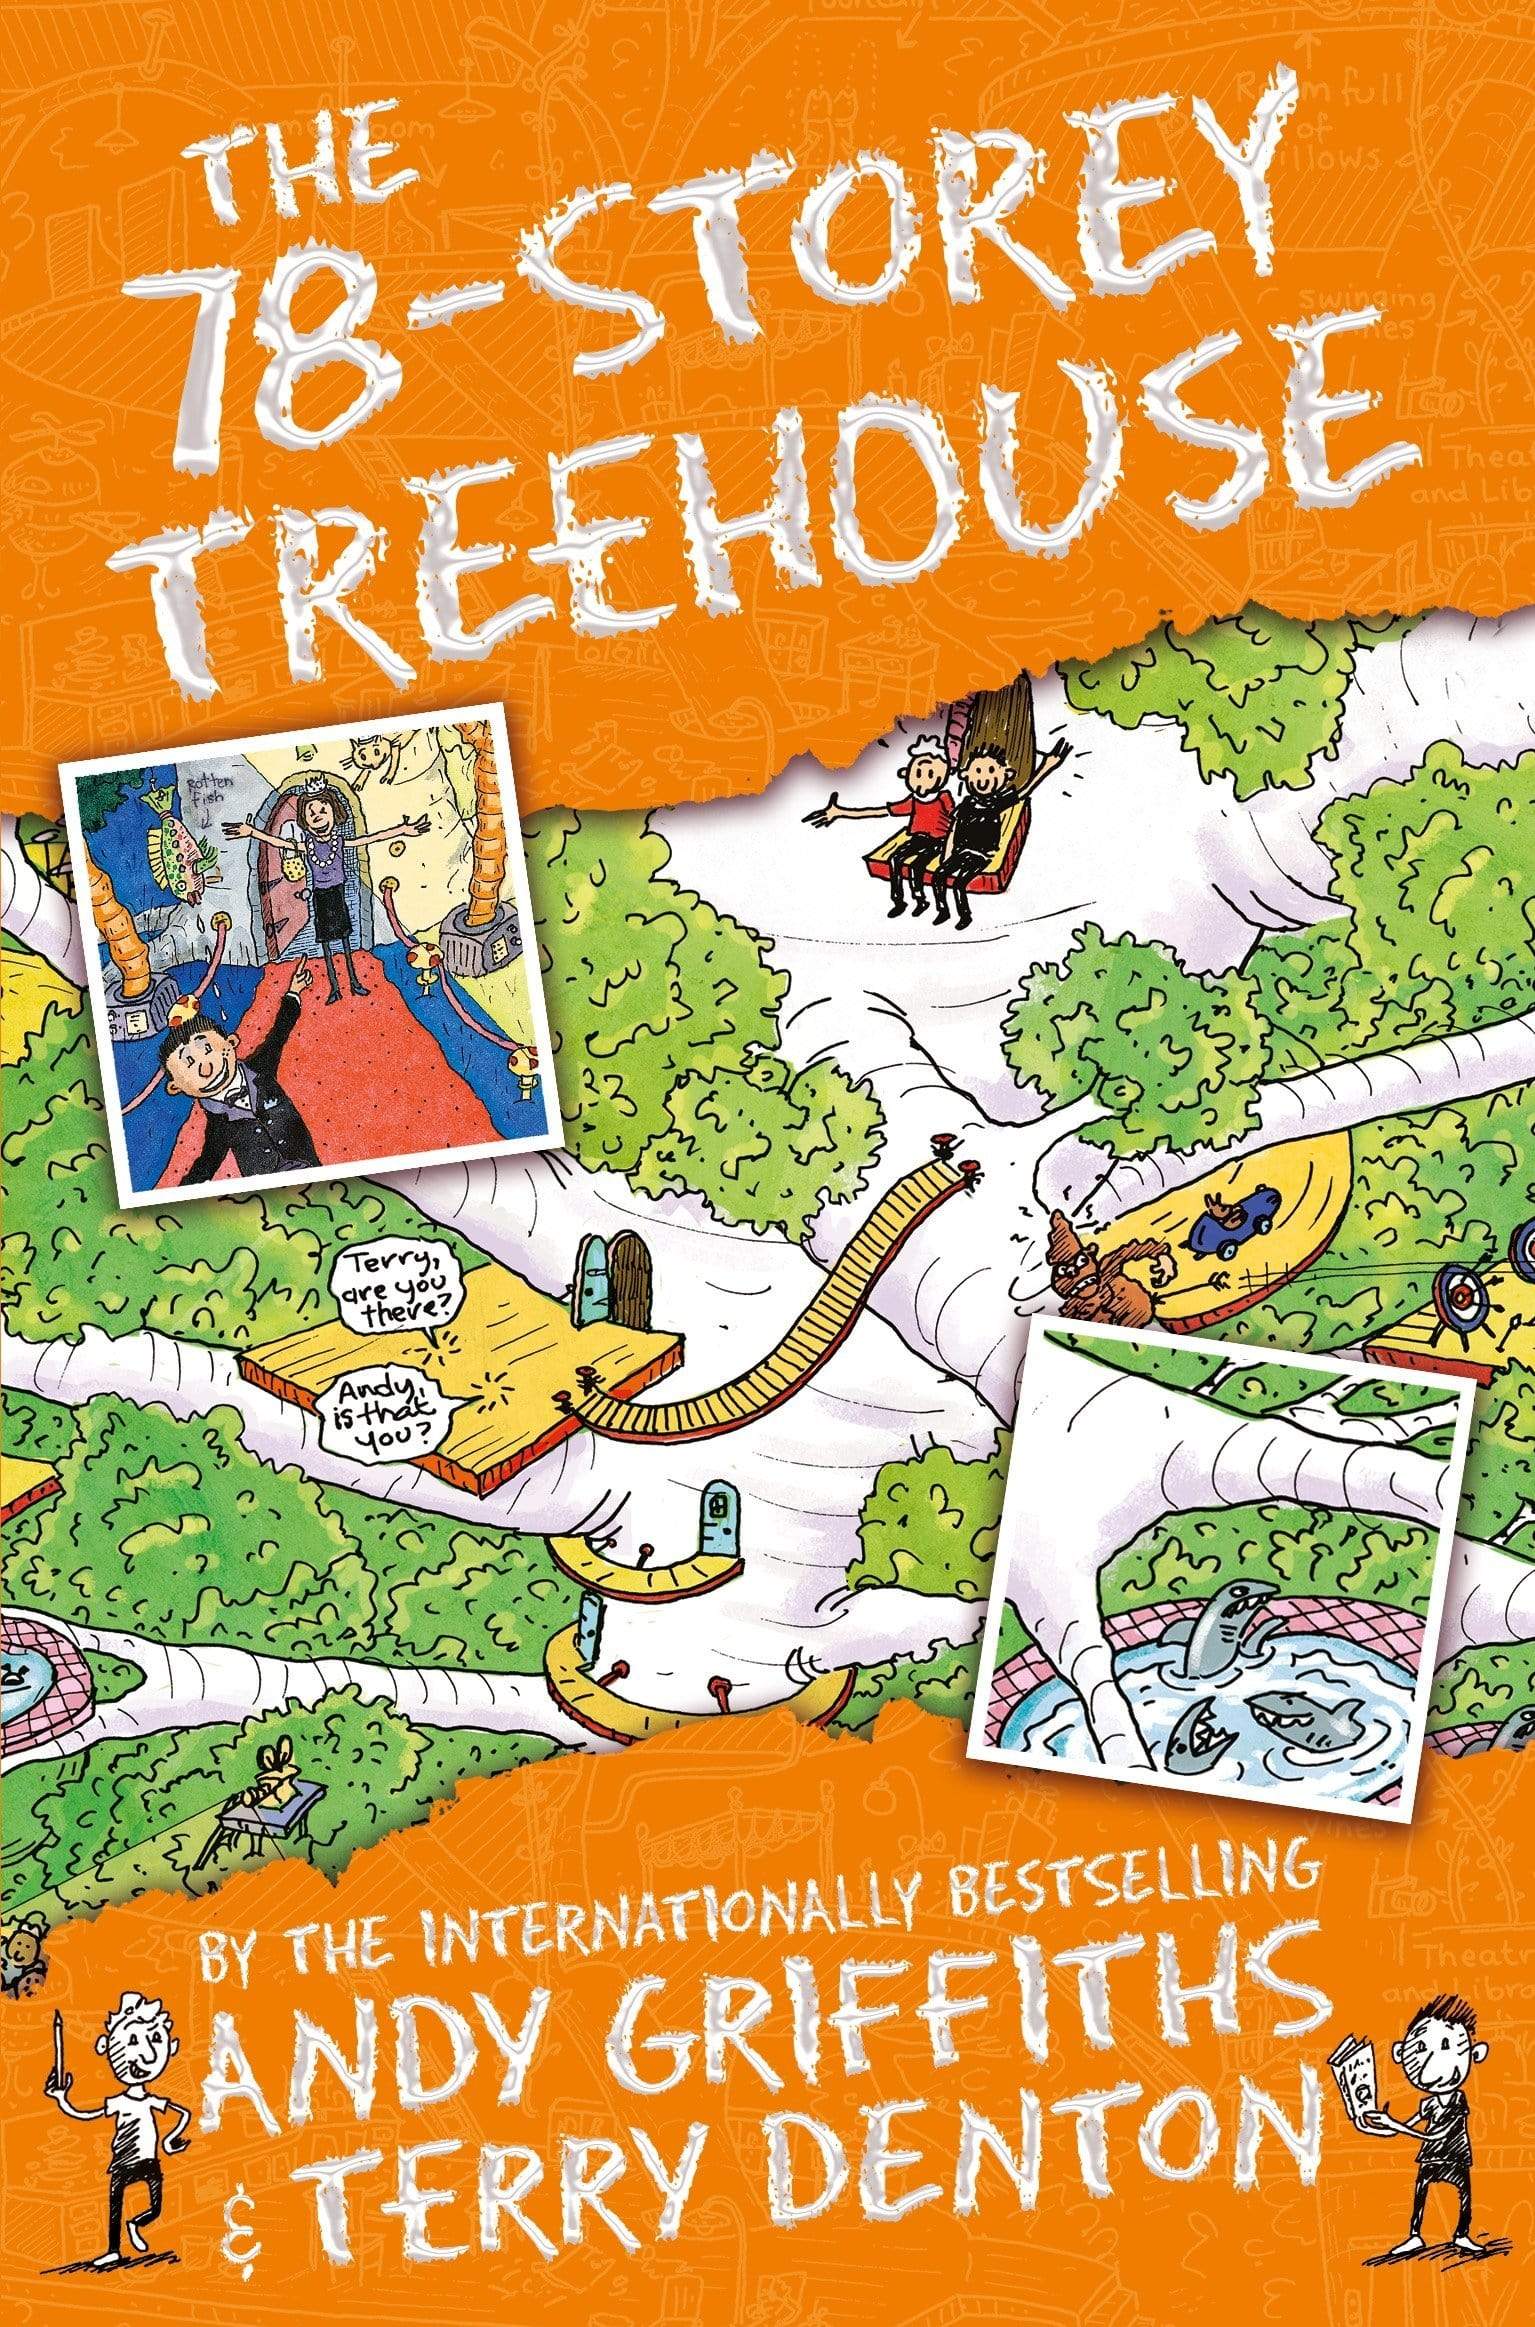 The 78-Storey Treehouse - Jashanmal Home